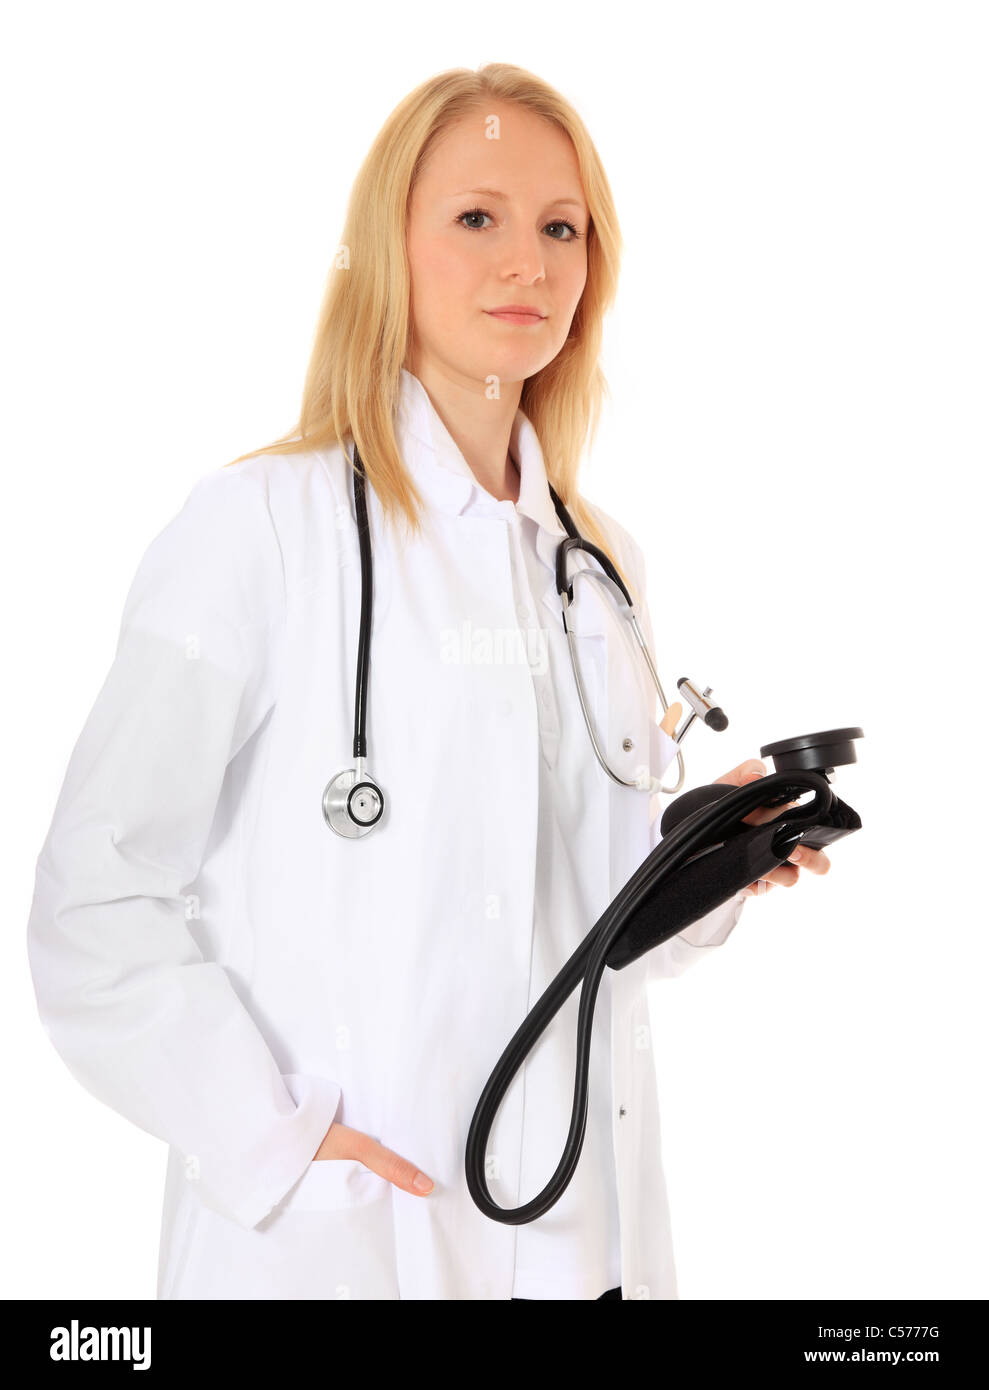 Attractive young doctor. All on white background. Stock Photo